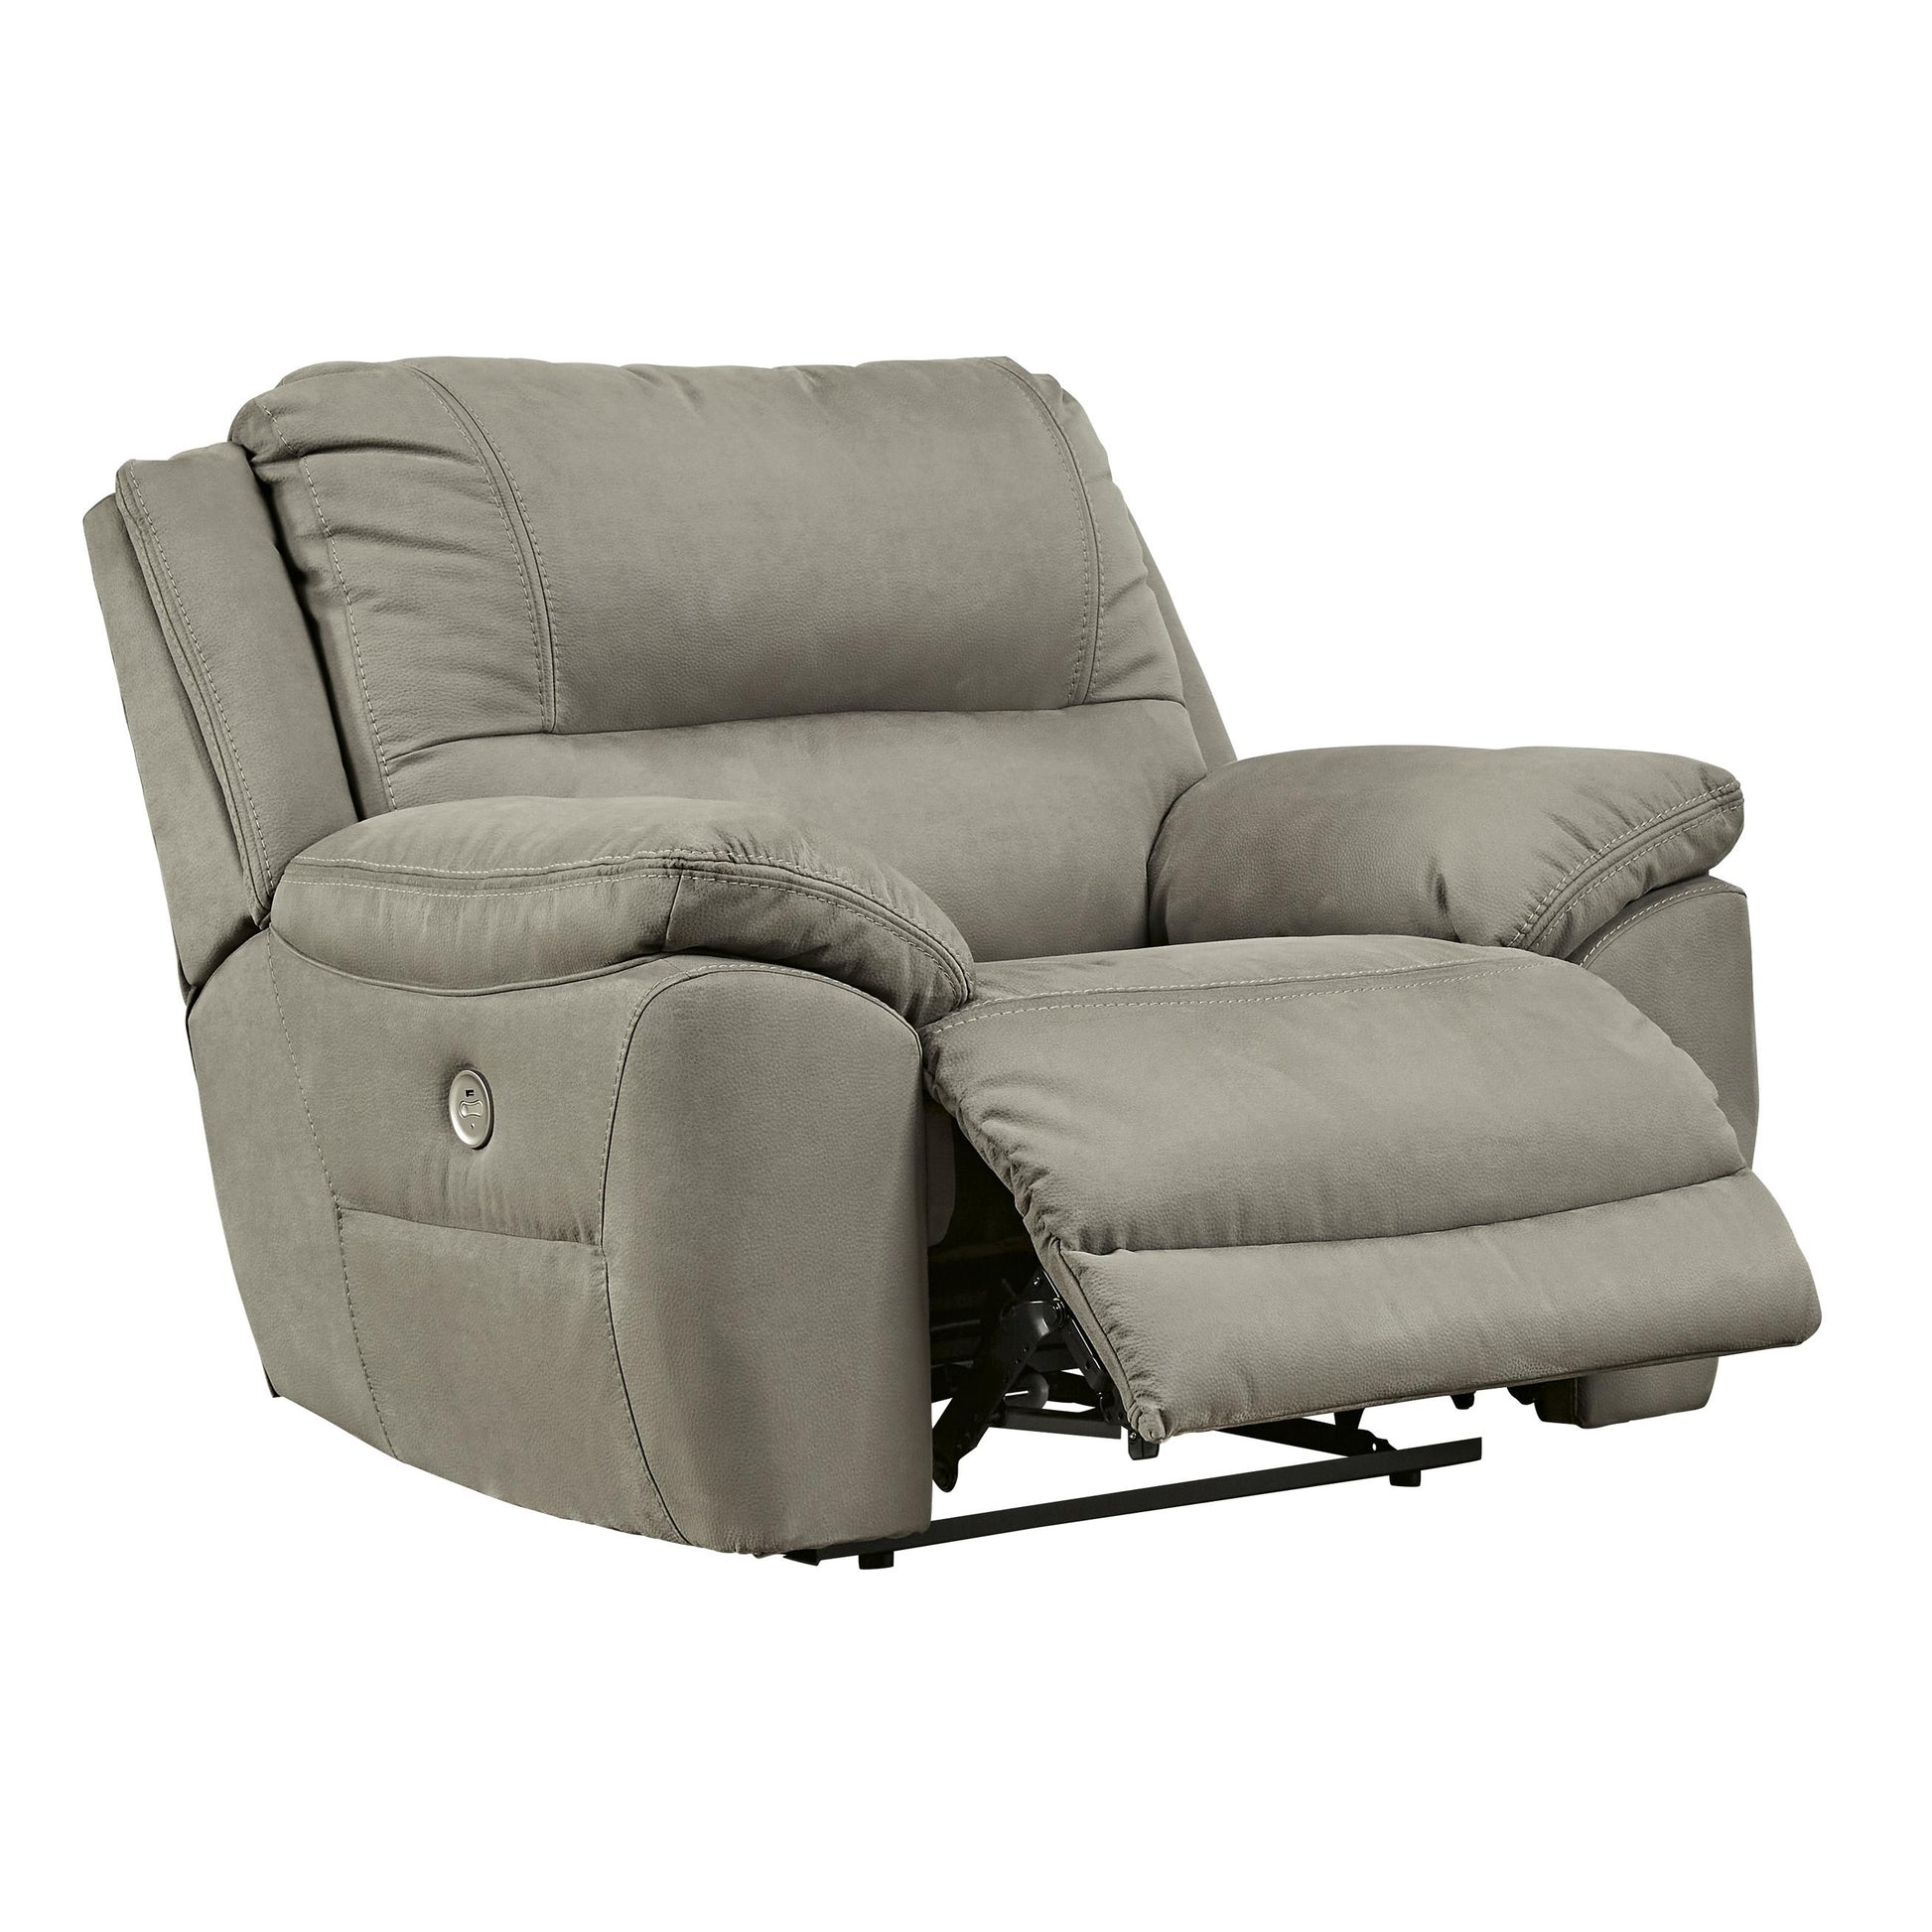 Signature Design by Ashley Next-Gen Gaucho Power Leather Look Recliner with Wall Recline 5420382 IMAGE 2